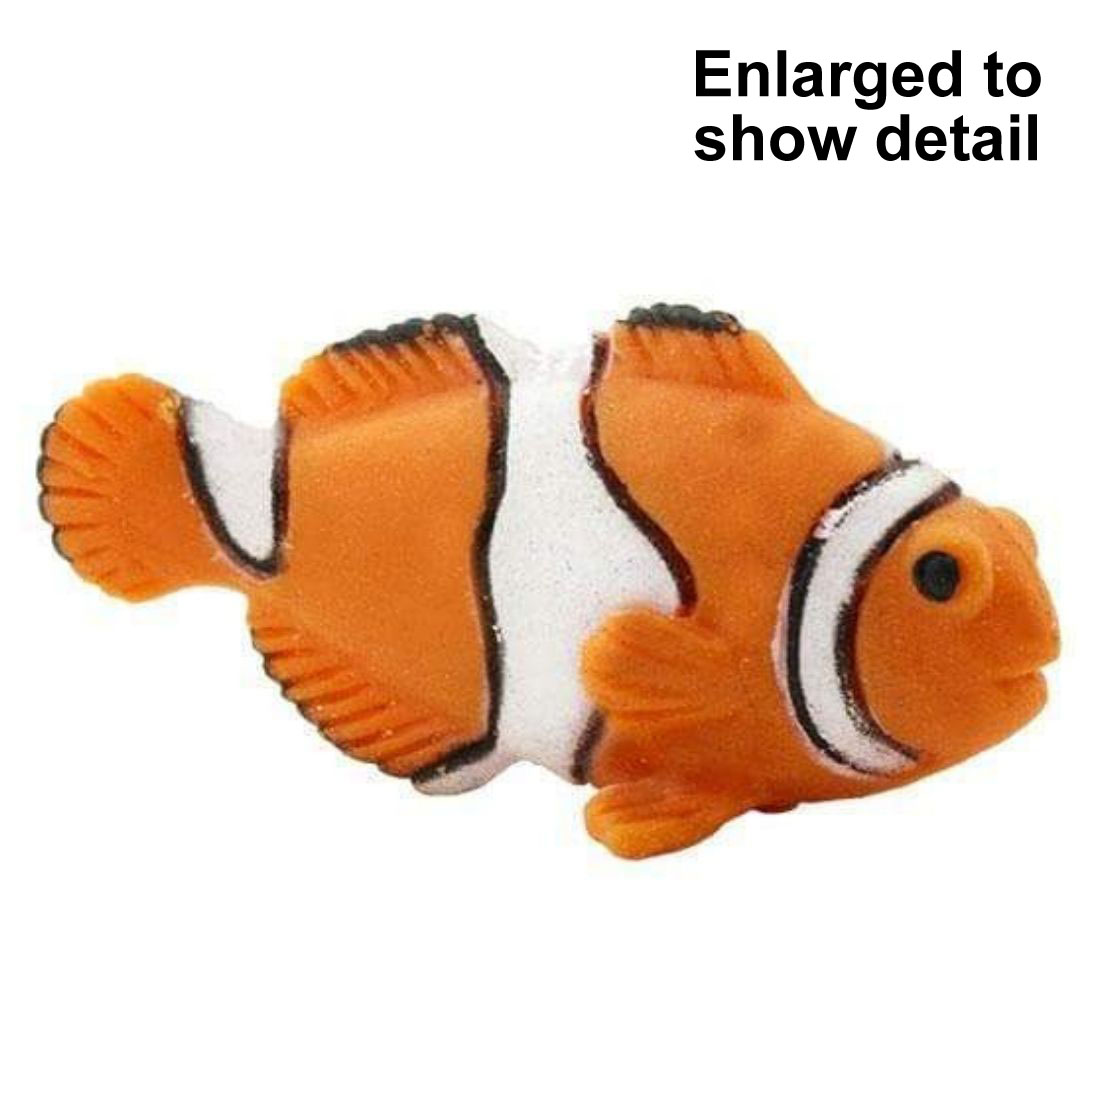 Clownfish Mini Figurine with the text Enlarged to Show Detail